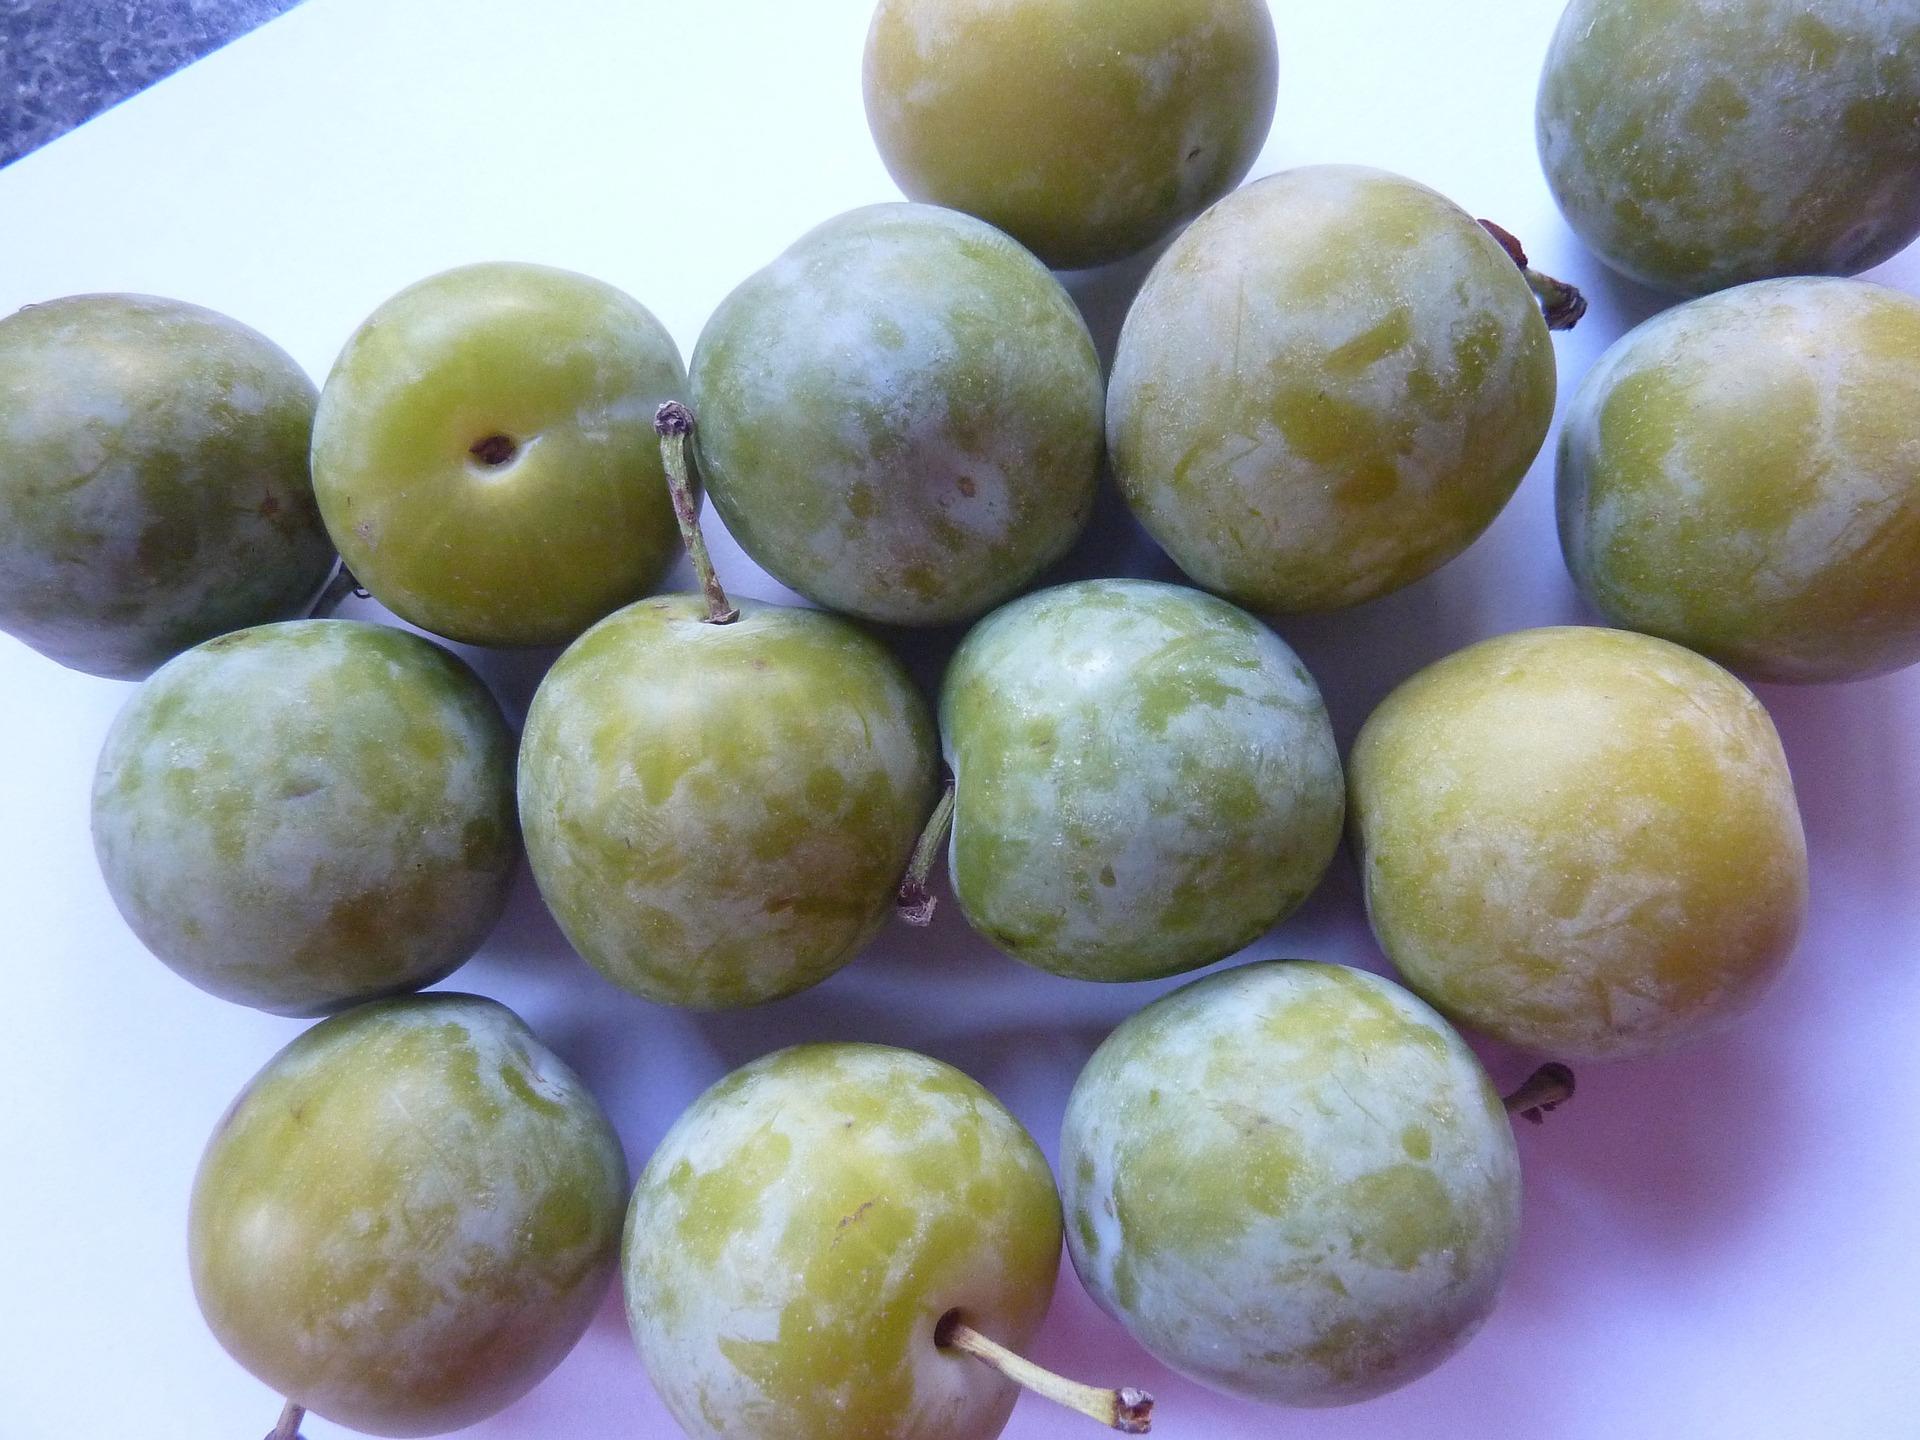 uploads/images/Greengages 2795632_1920